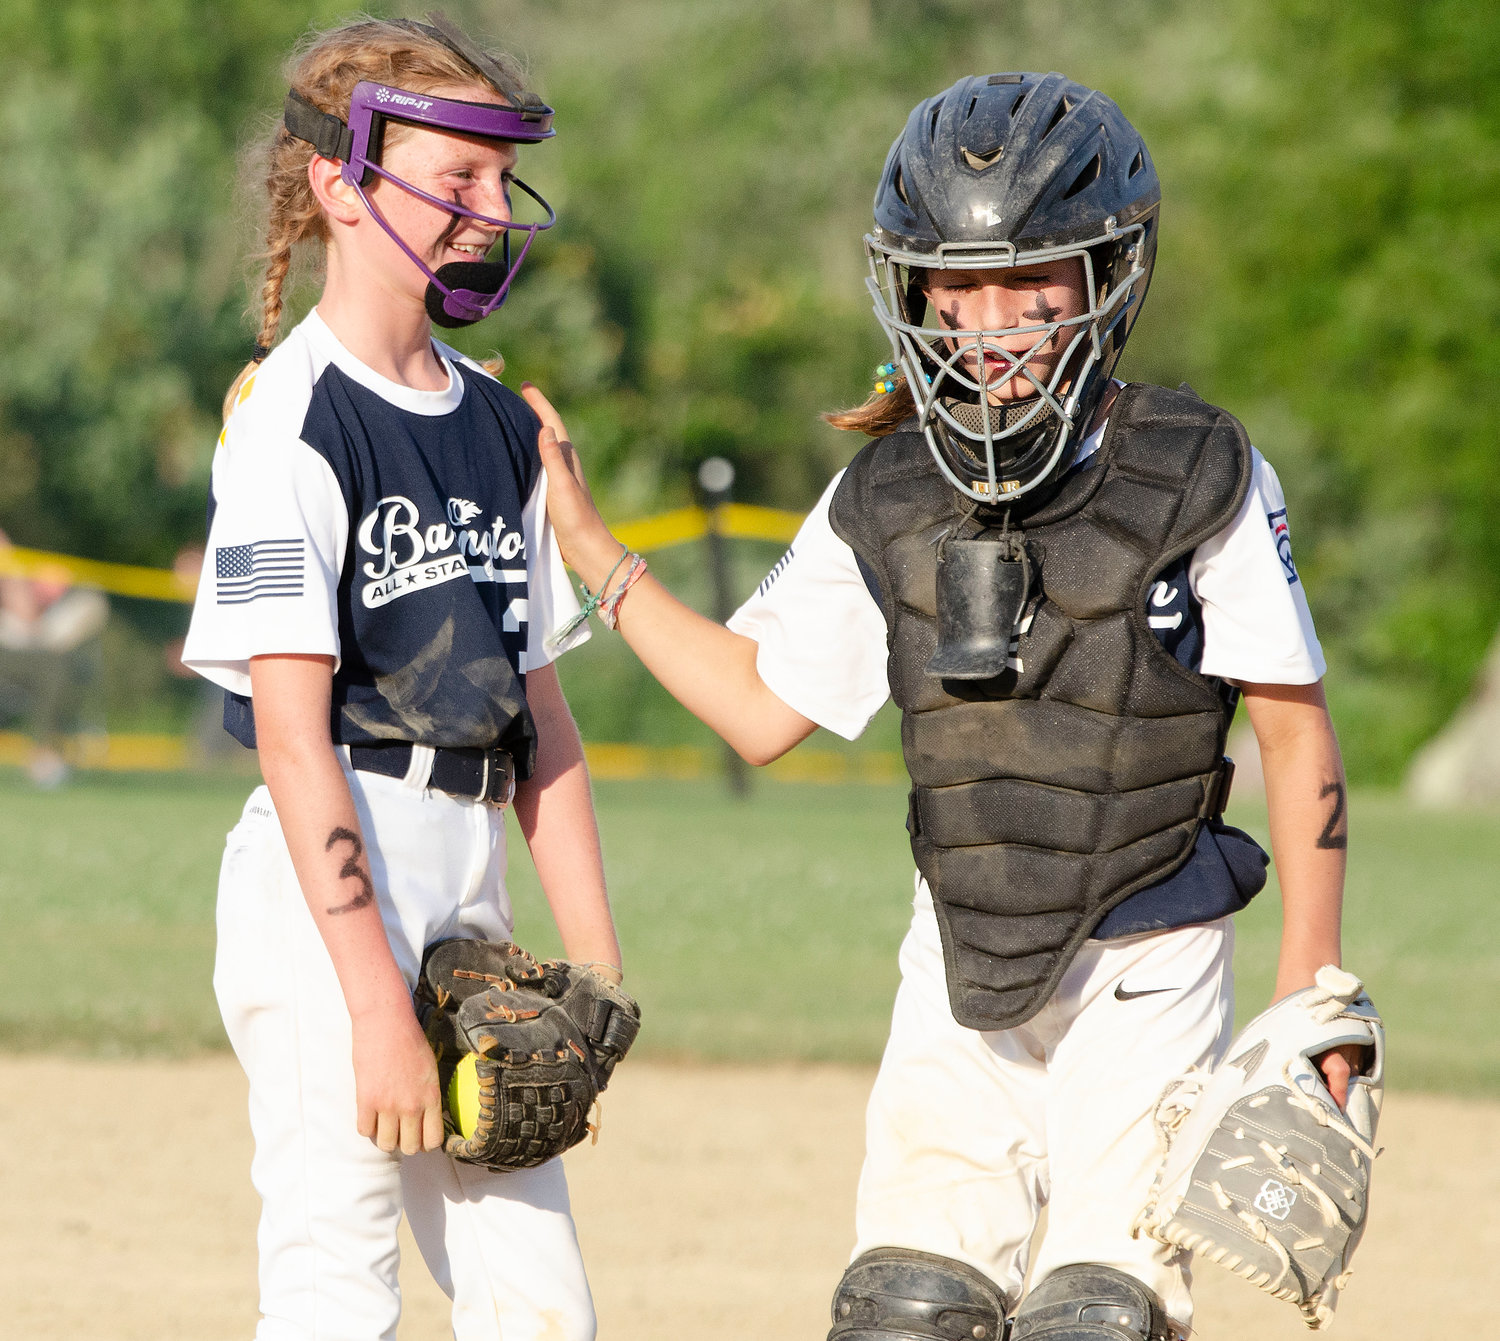 Catcher Angie Promades (right) talks to pitcher Lucy LoVerme during Barrington's game against Cranston Western.